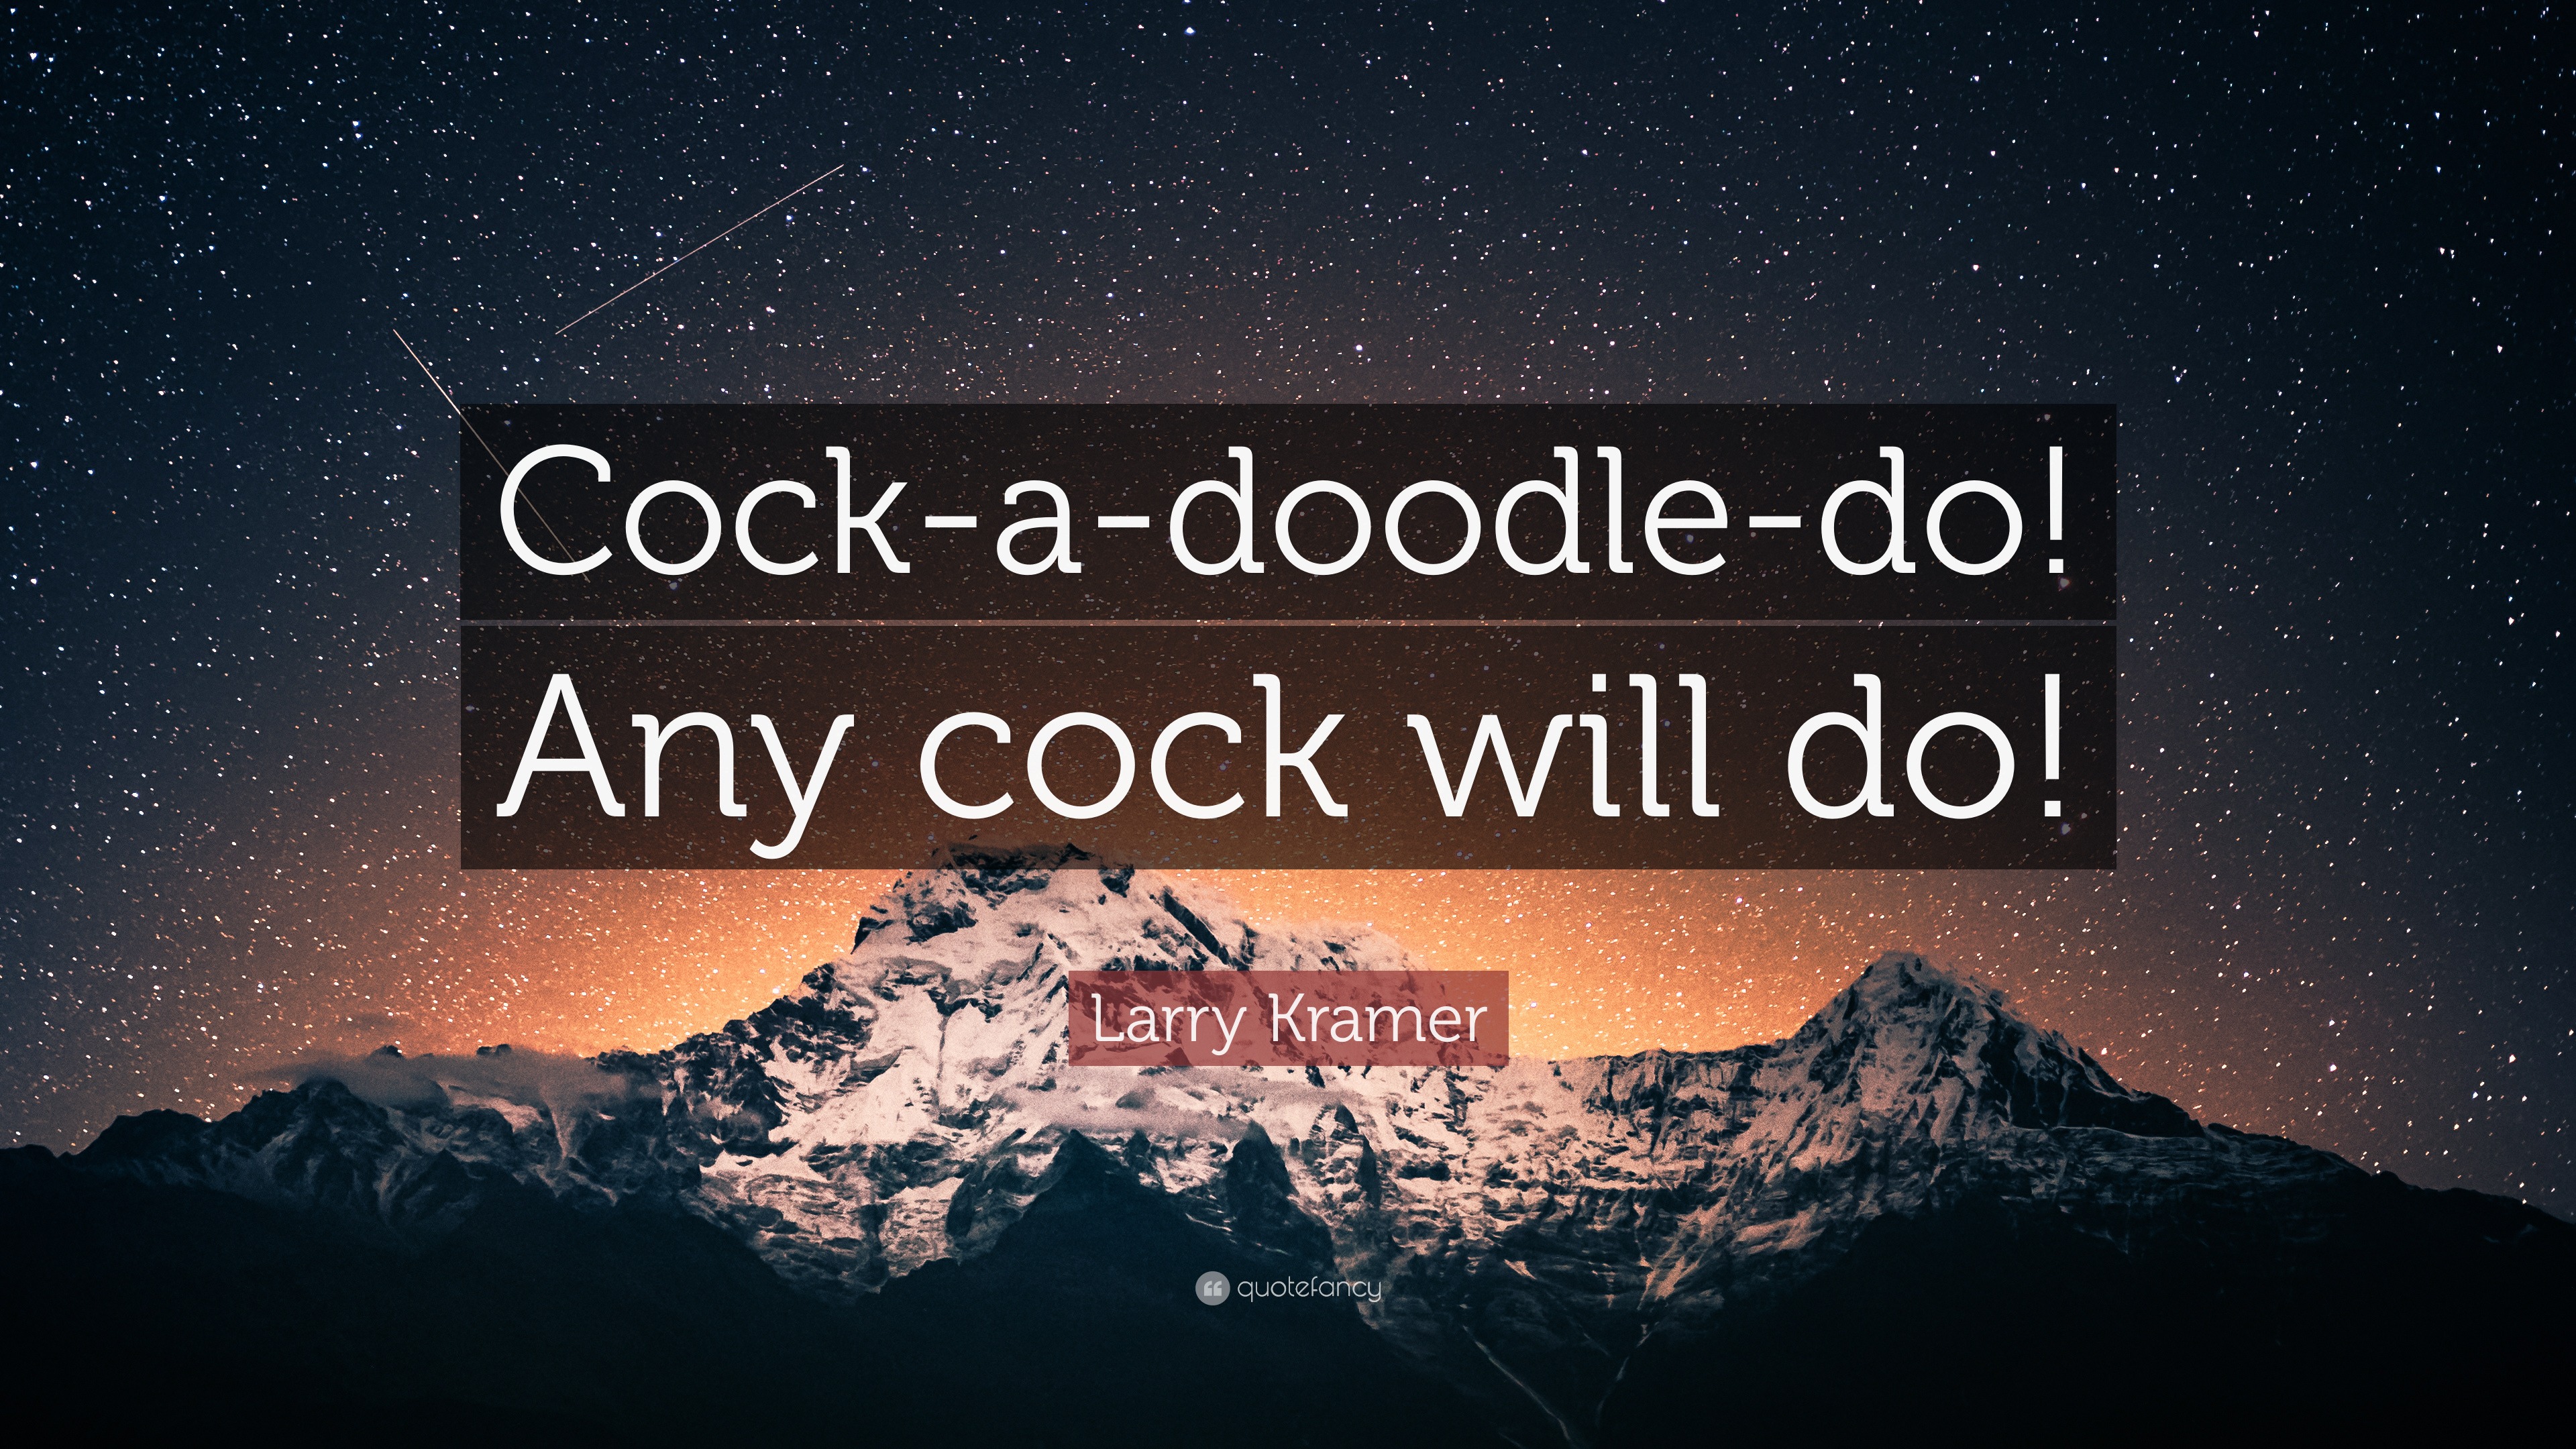 Any cock will do